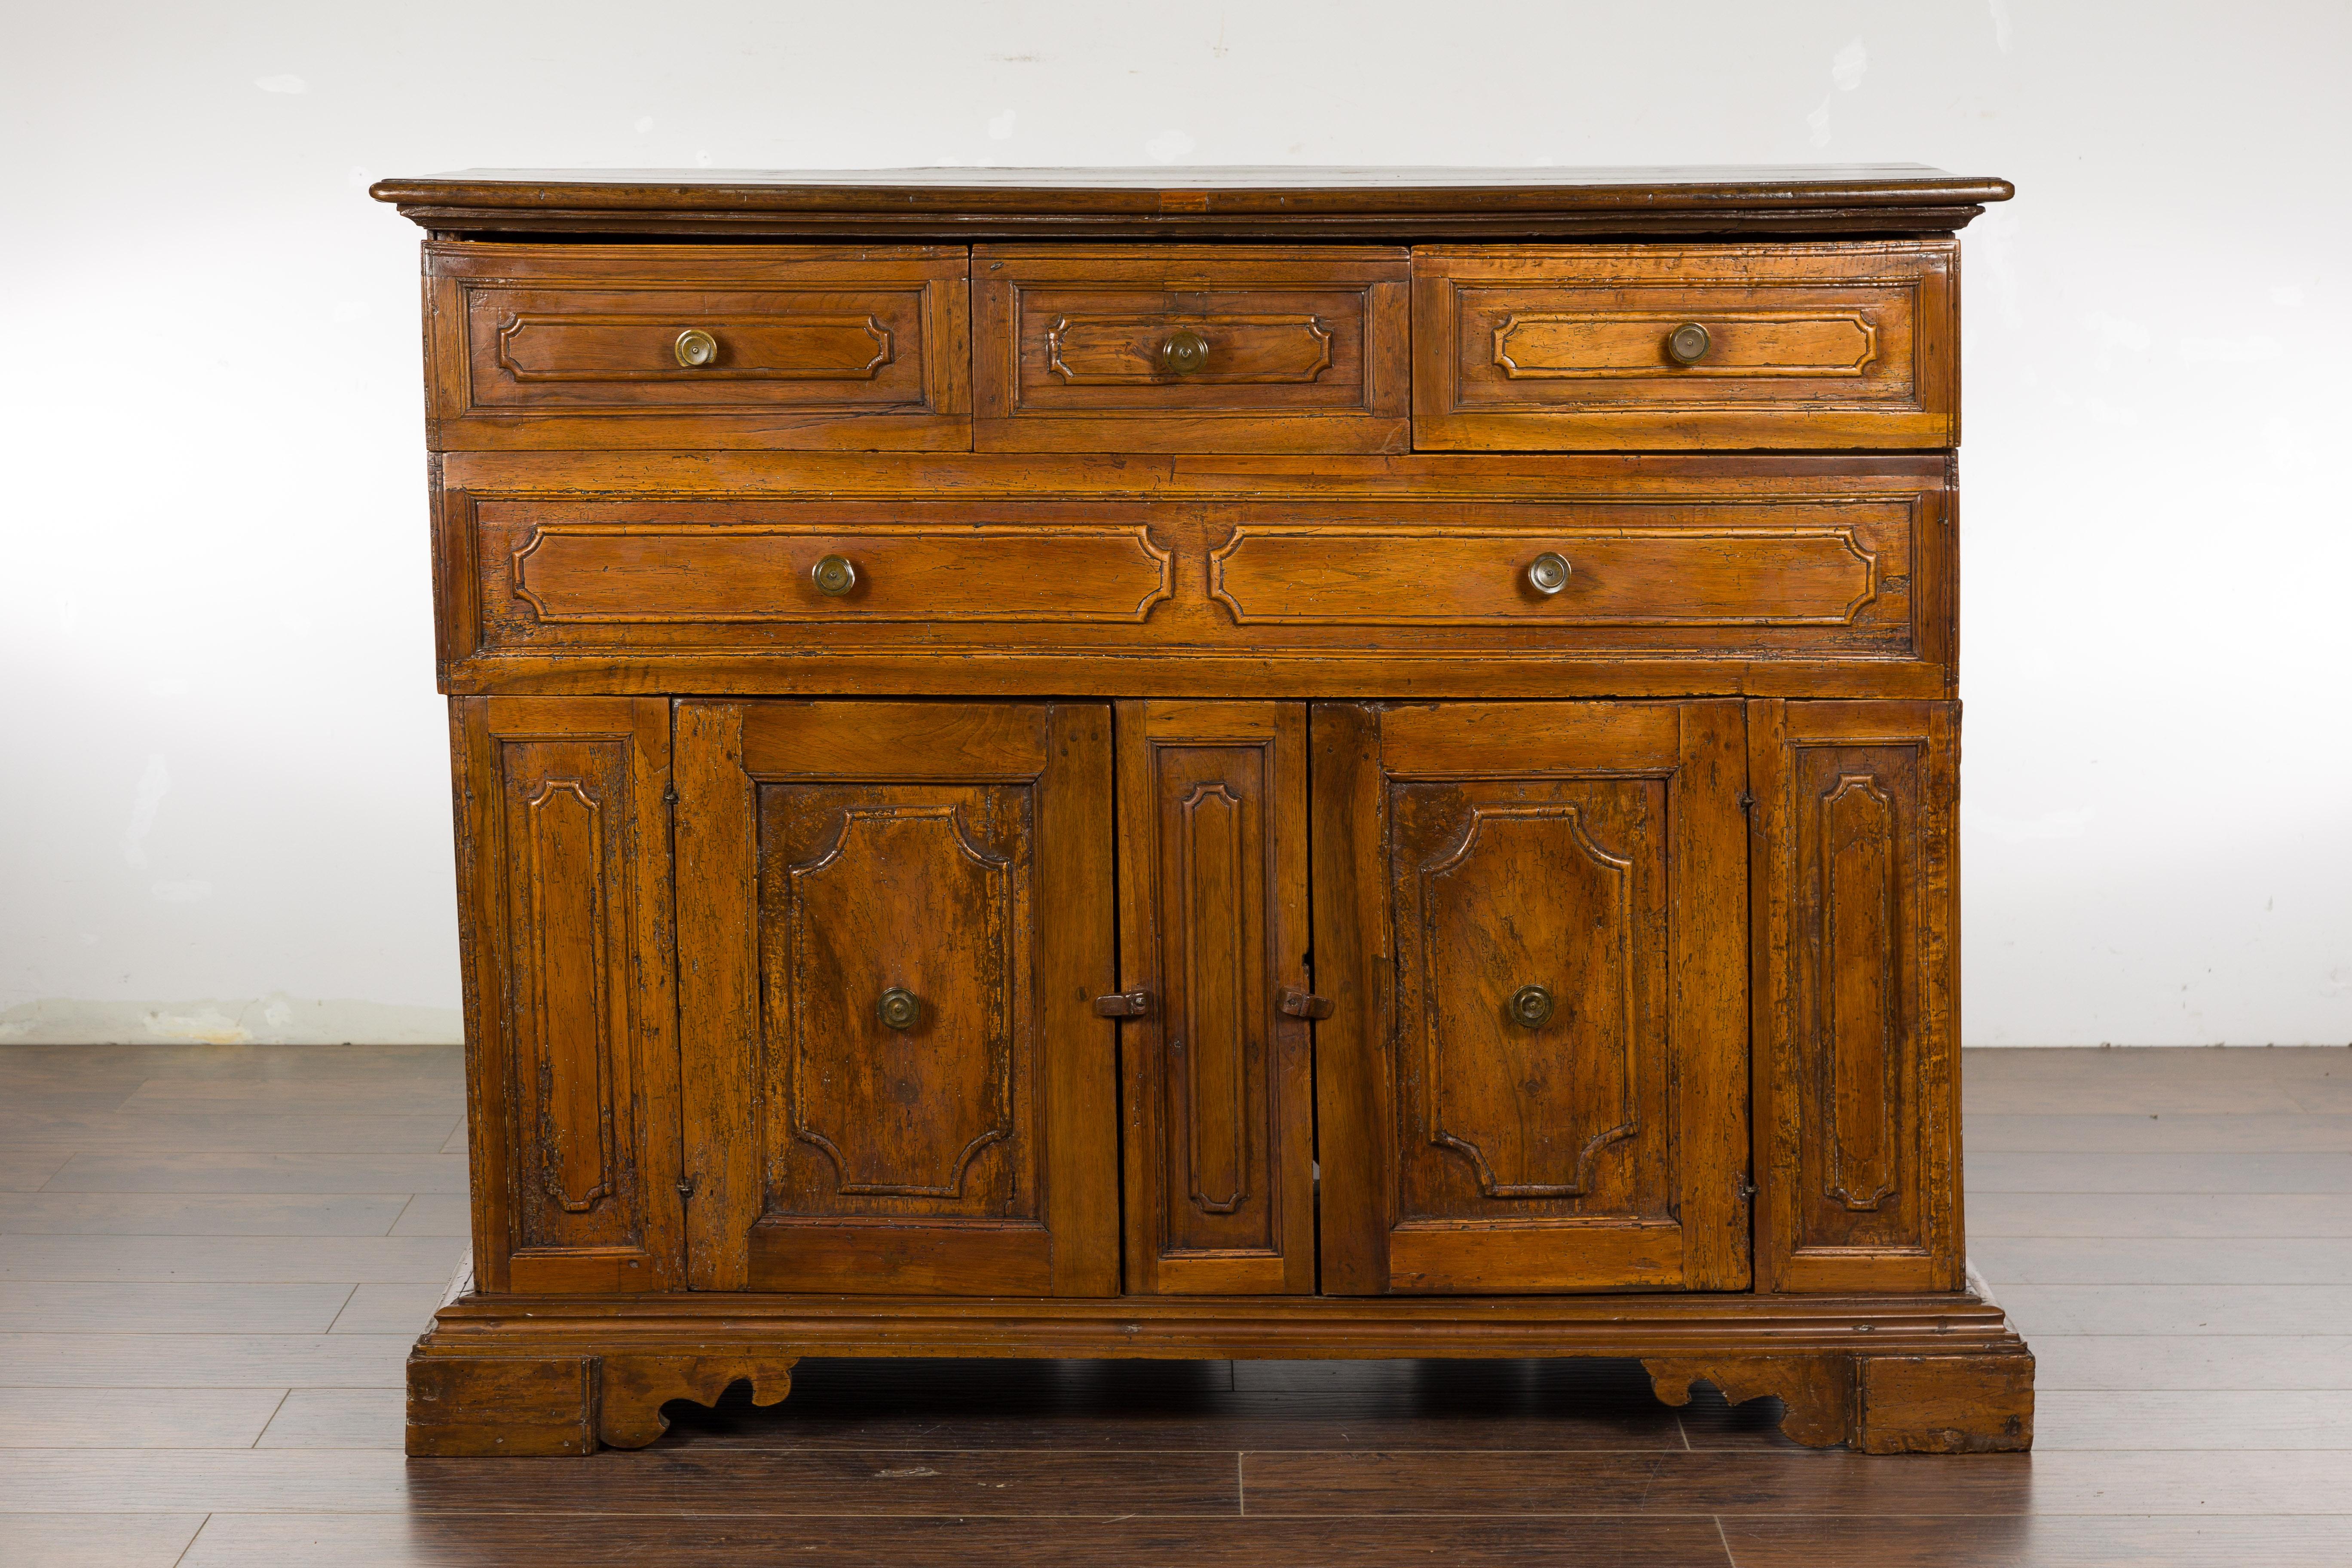 An Italian walnut credenza from the 18th century, with four drawers and two petite doors. Introducing an exquisite piece of history and Italian craftsmanship, this 18th-century Italian walnut credenza is a symphony of design that speaks volumes of